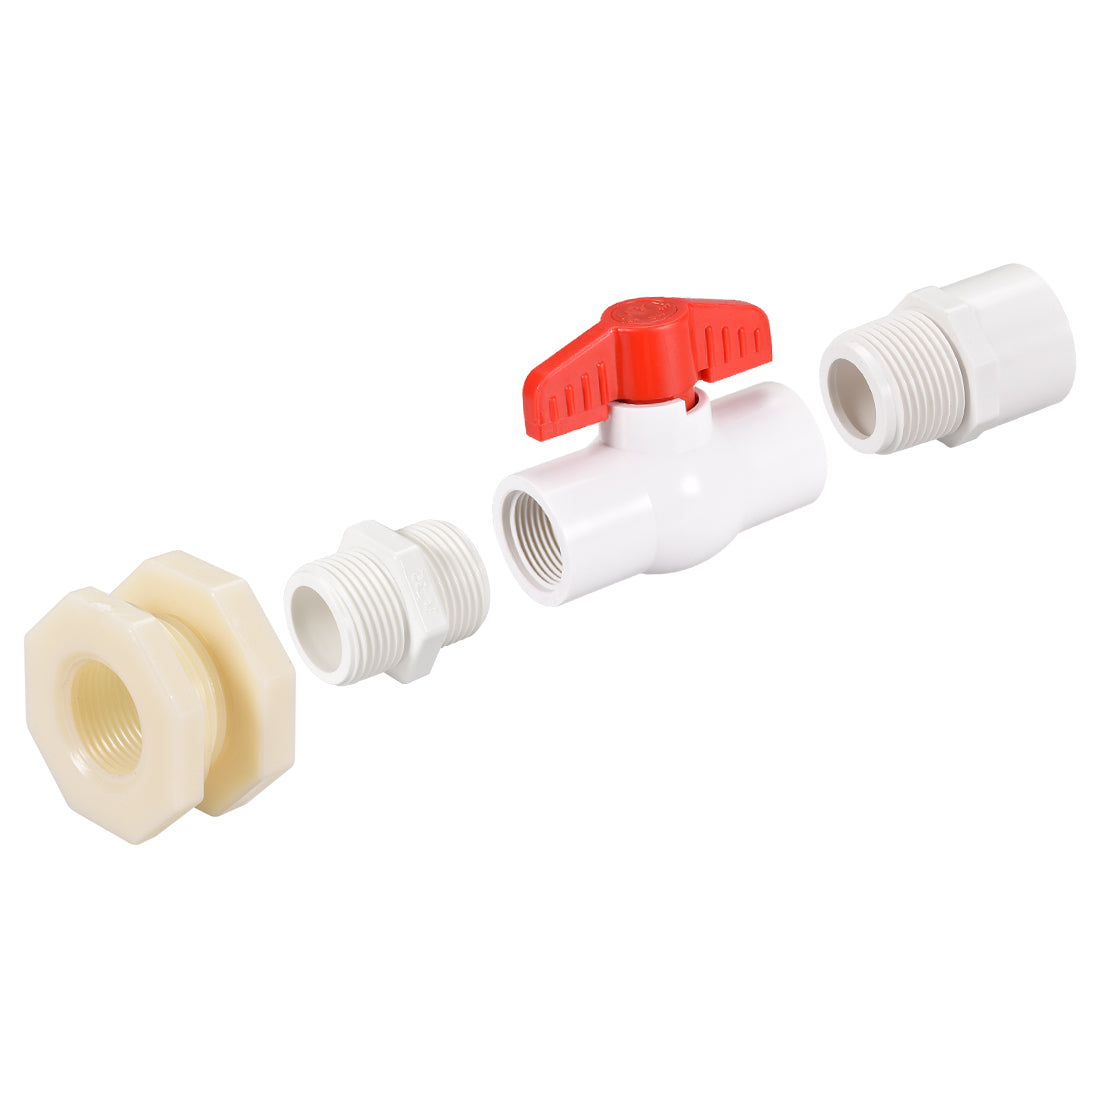 Uxcell Uxcell PVC Ball Valve Connector Spigot Kit G3/4, with Bulkhead, White Red 2Pcs